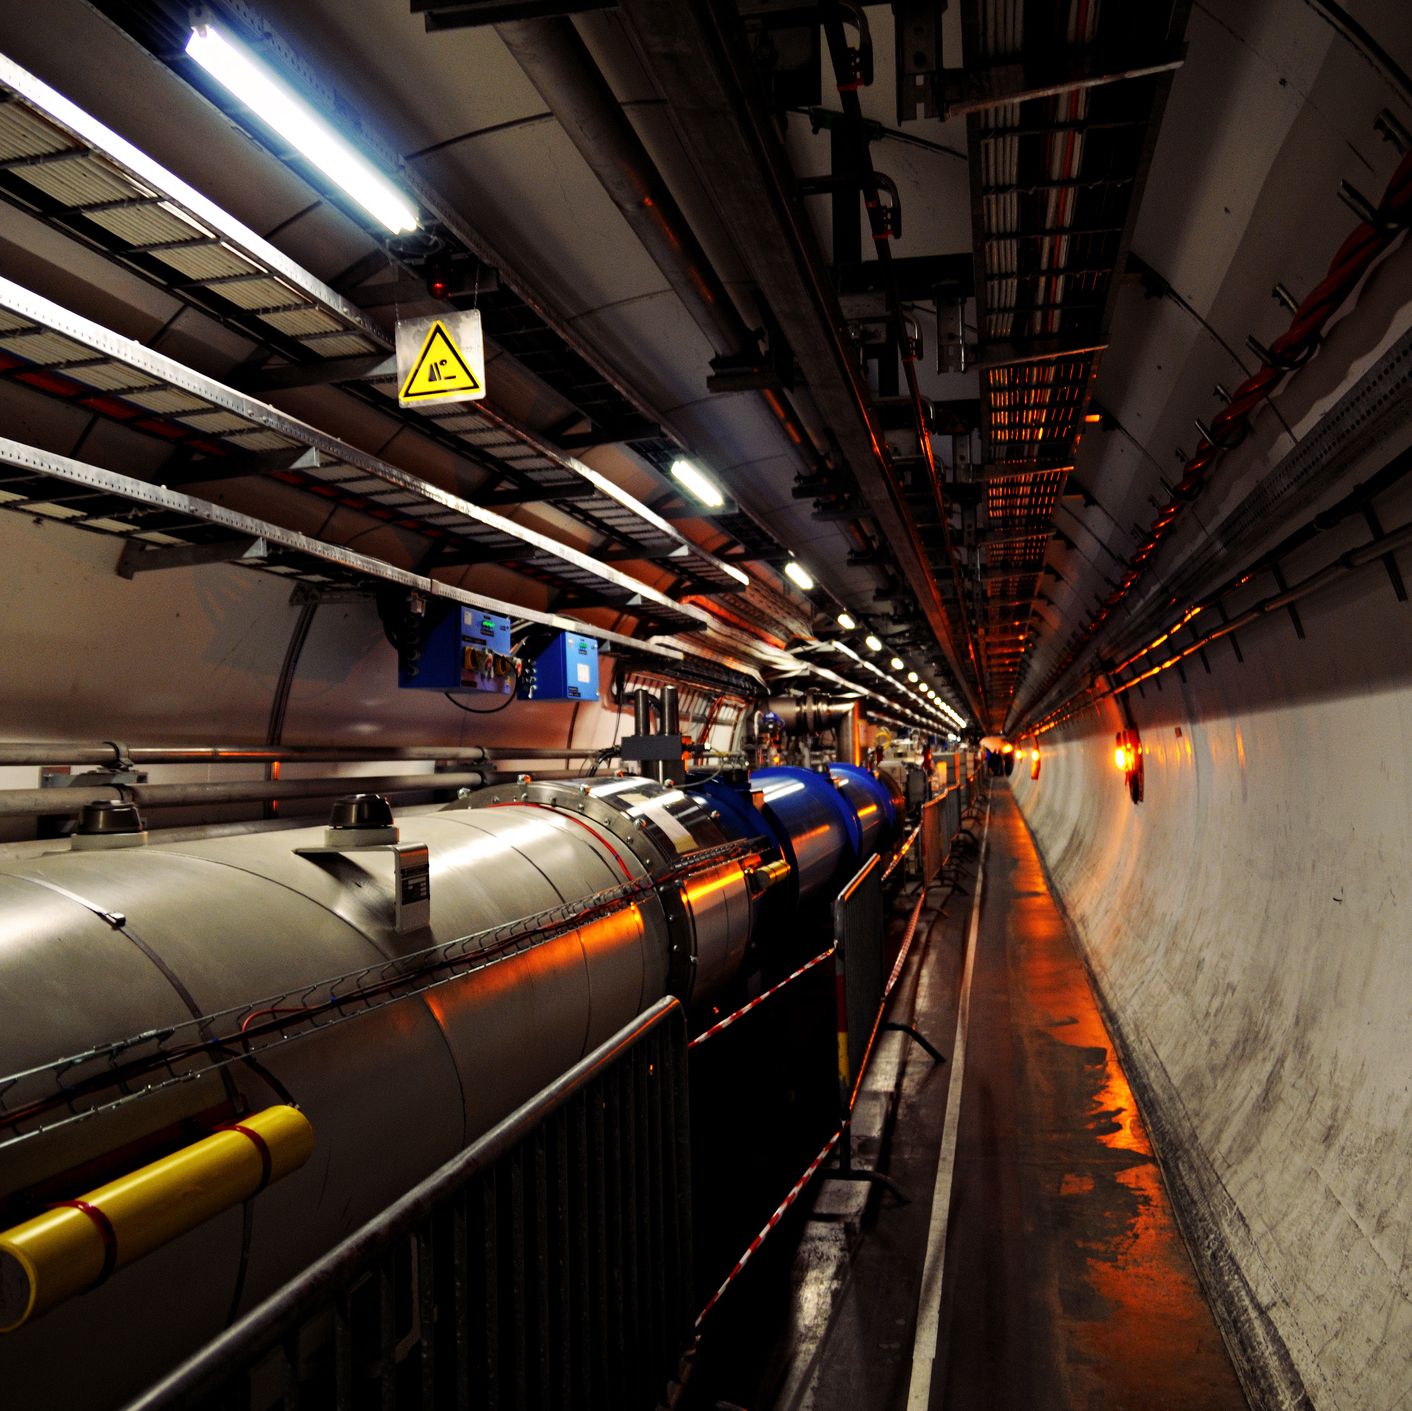 Humanity's Quest to Find New Physics Hinges on a Controversial Particle Smasher